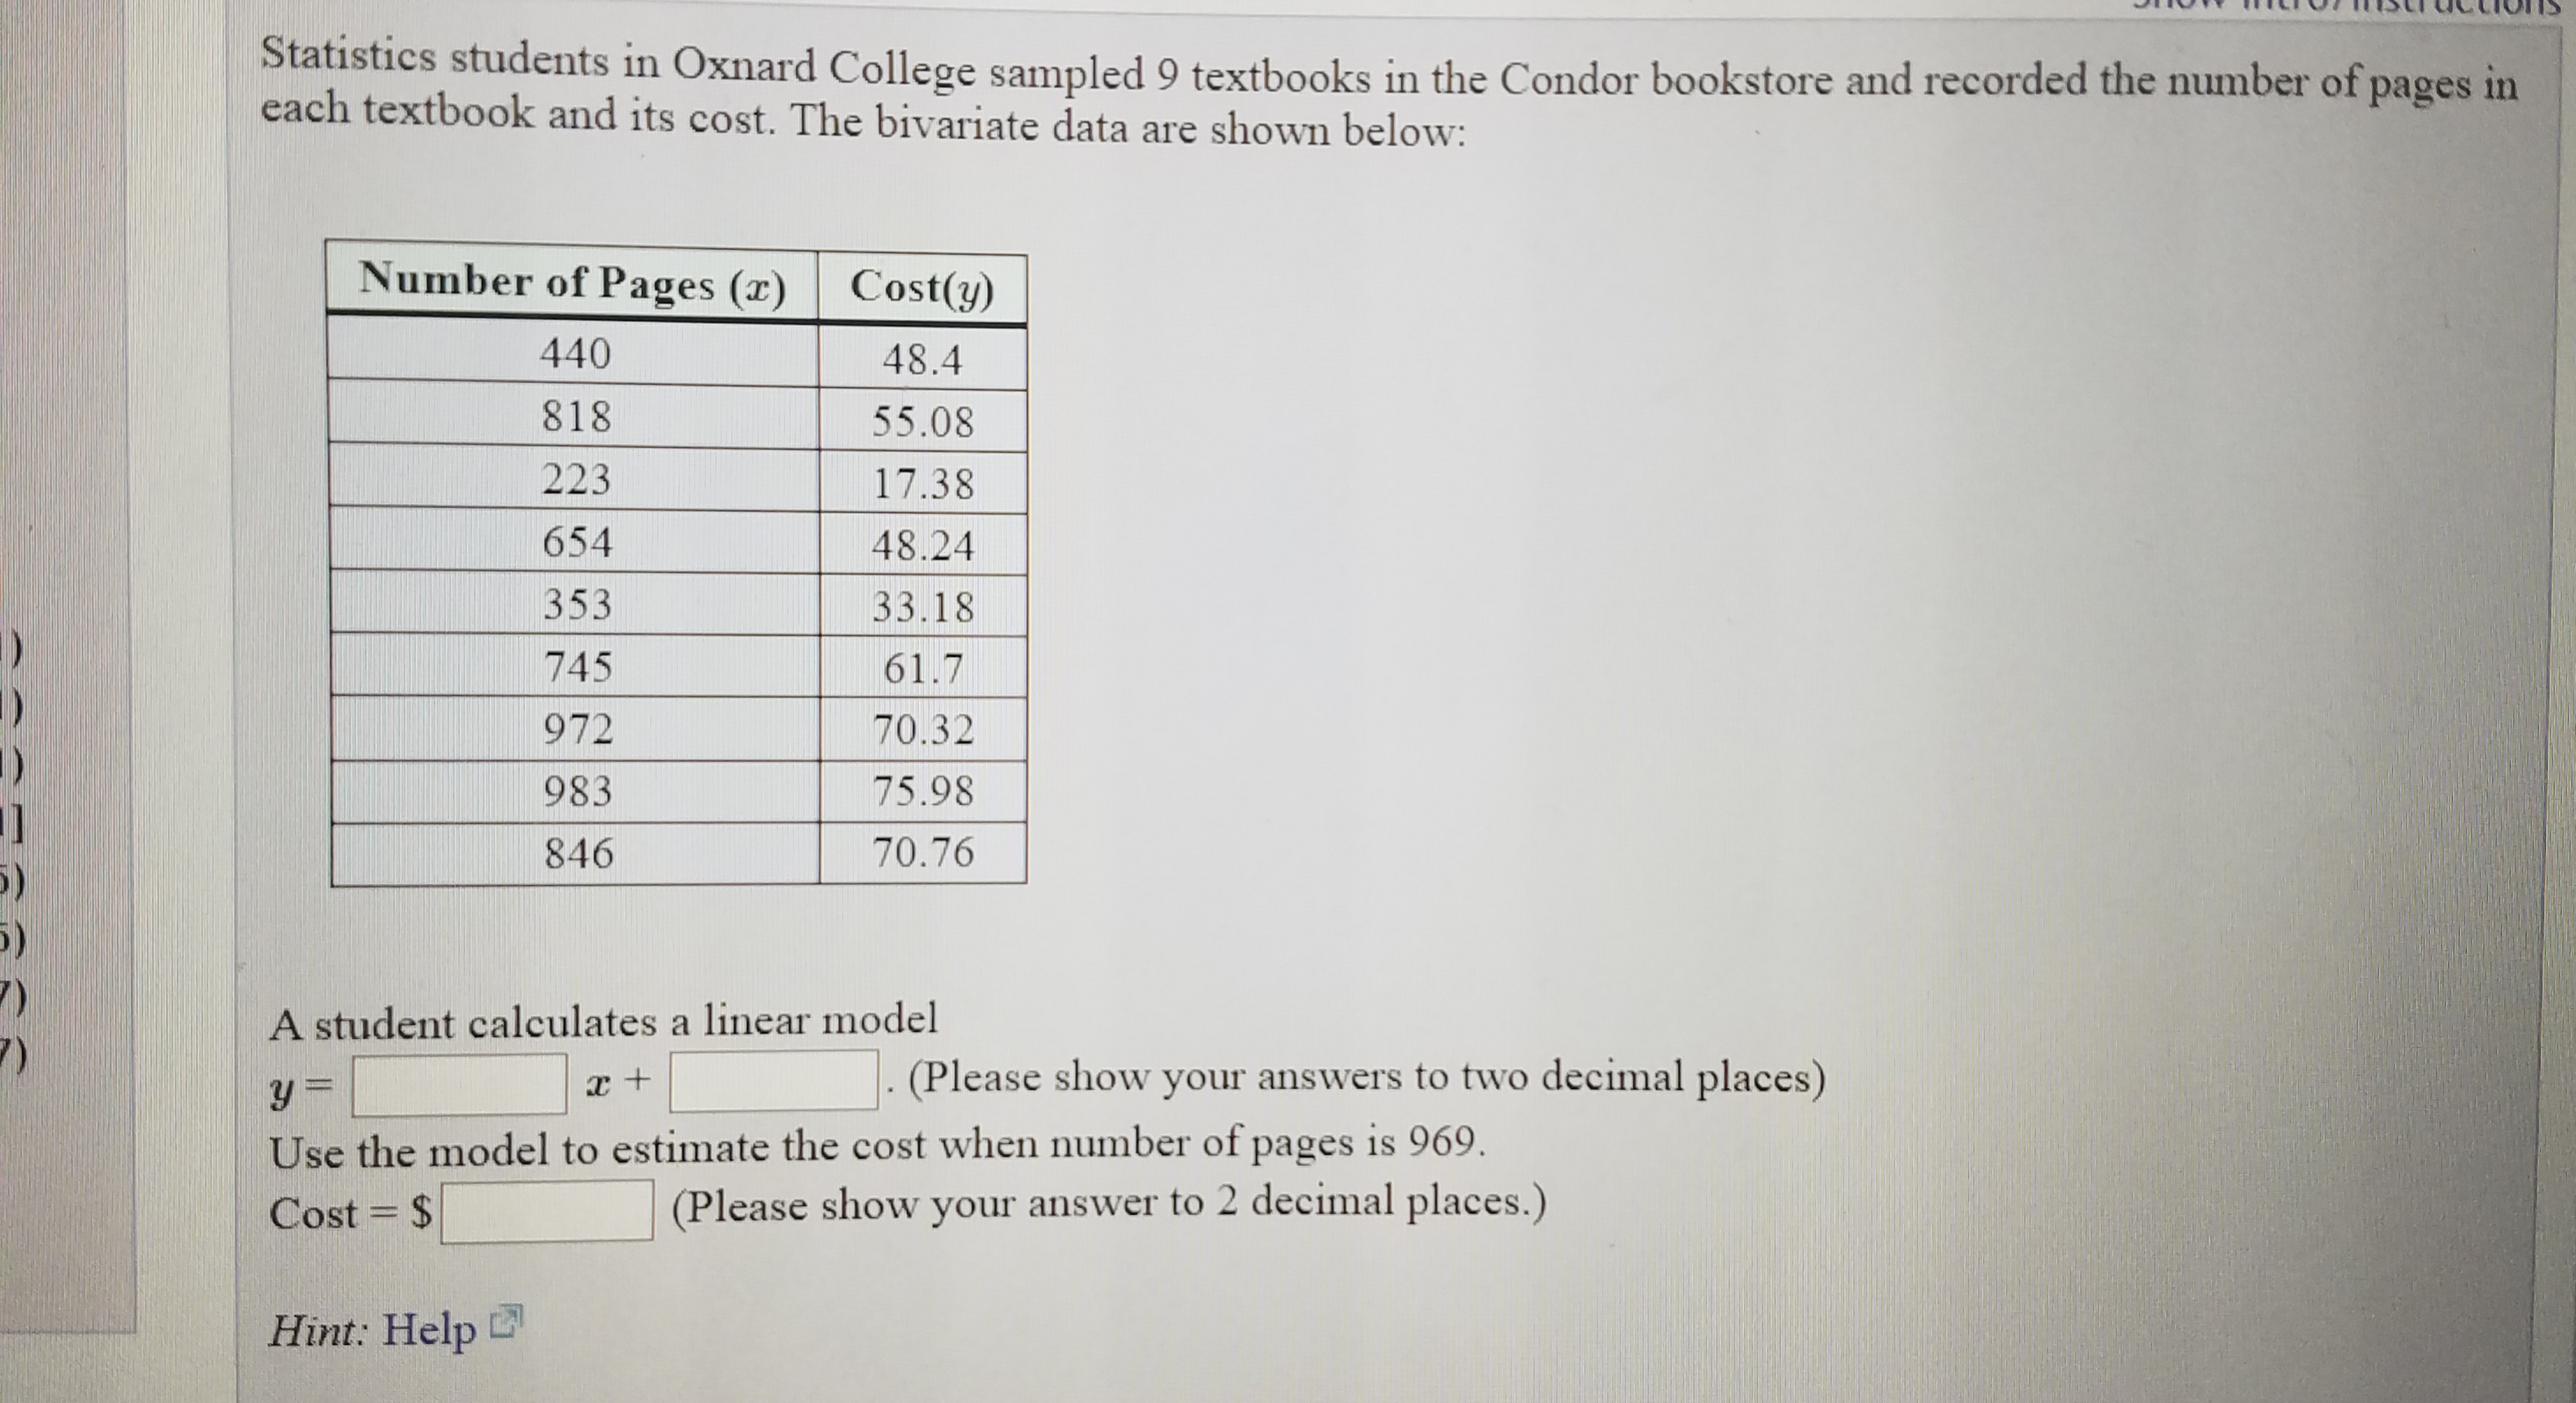 Statistics students in Oxnard College sampled 9 textbooks in the Condor bookstore and recorded the number of pages in
each textbook and its cost. The bivariate data are shown below:
Number of Pages (r)
Cost(y)
440
48.4
818
55.08
223
17.38
654
48.24
353
33.18
745
61.7
972
70.32
983
75.98
846
70.76
A student calculates a linear model
(Please show your answers to two decimal places)
Use the model to estimate the cost when number of pages is 969.
(Please show your answer to 2 decimal places.)
Cost = $
Hint: Help
